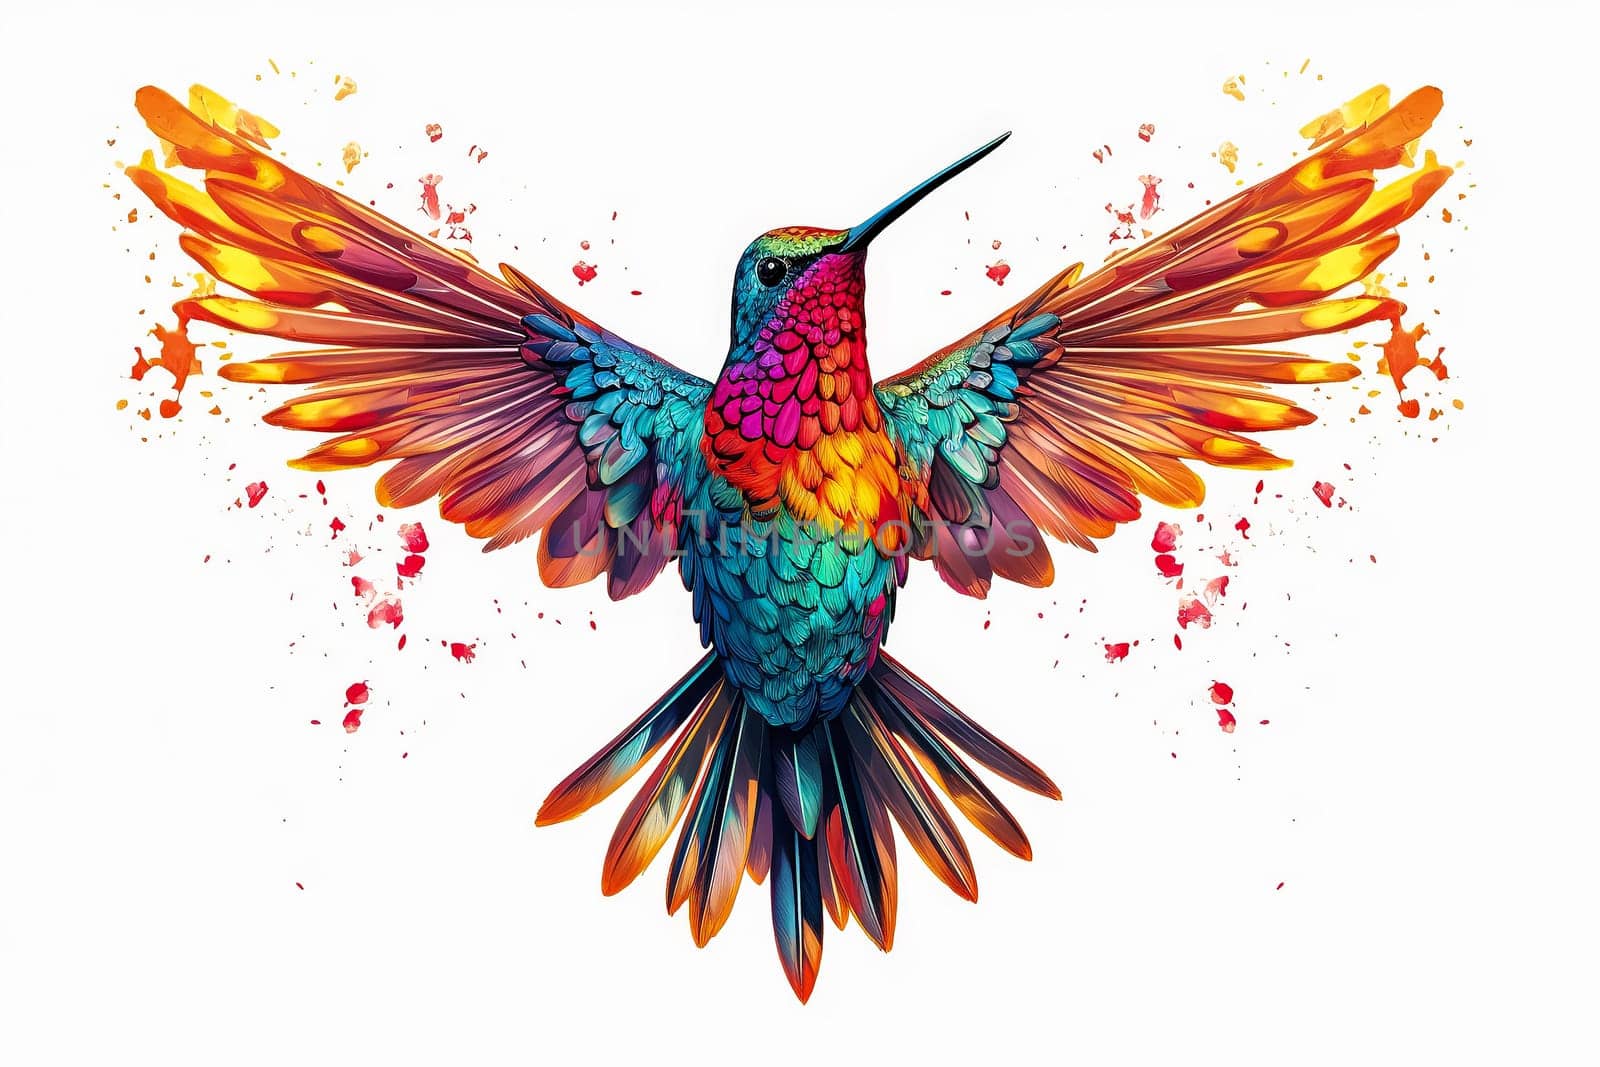 A colorful hummingbird is flying in the air with its wings spread wide. The bird is surrounded by a splash of bright colors, giving the image a lively and energetic feel. The scene captures the beauty